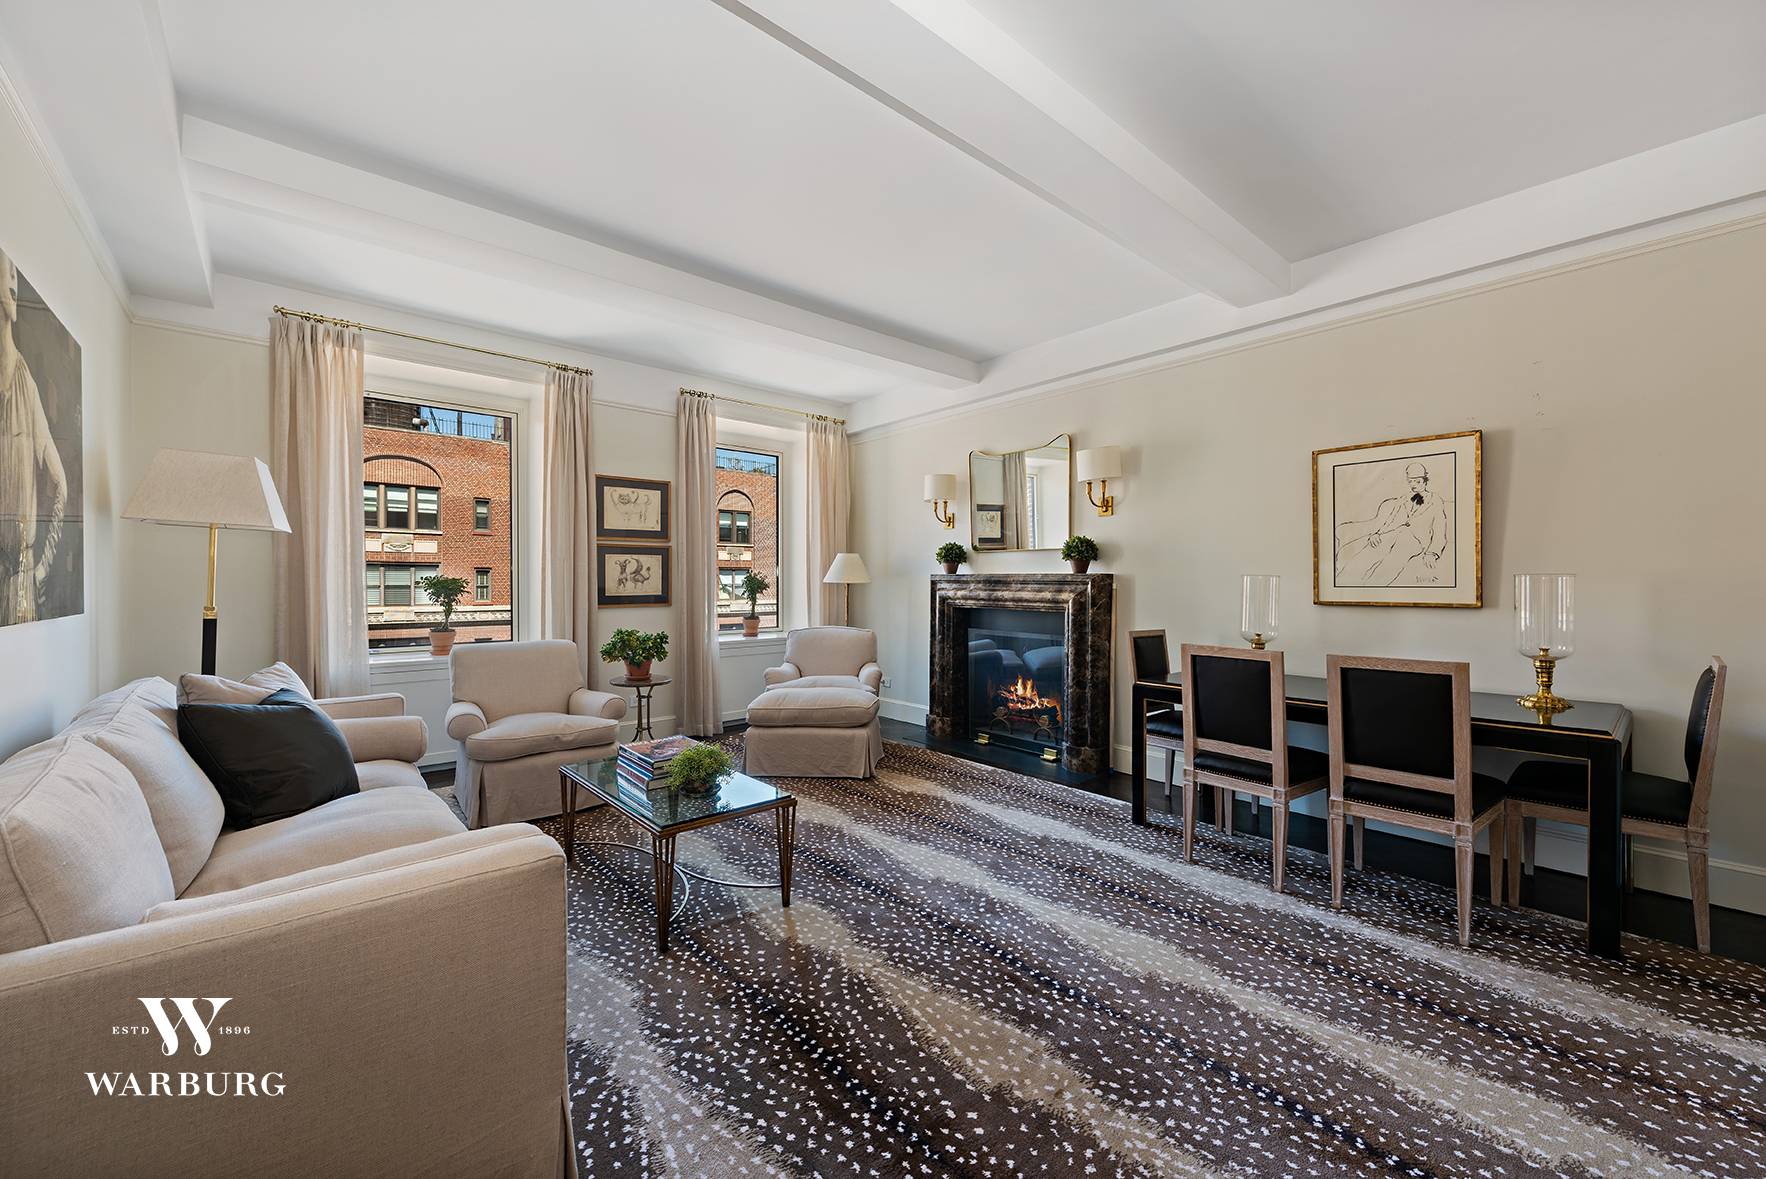 Impeccably renovated to the highest standard in the best of taste with wonderful style this exceptional full floor home in one of the finest prewar cooperative buildings on the Upper ...